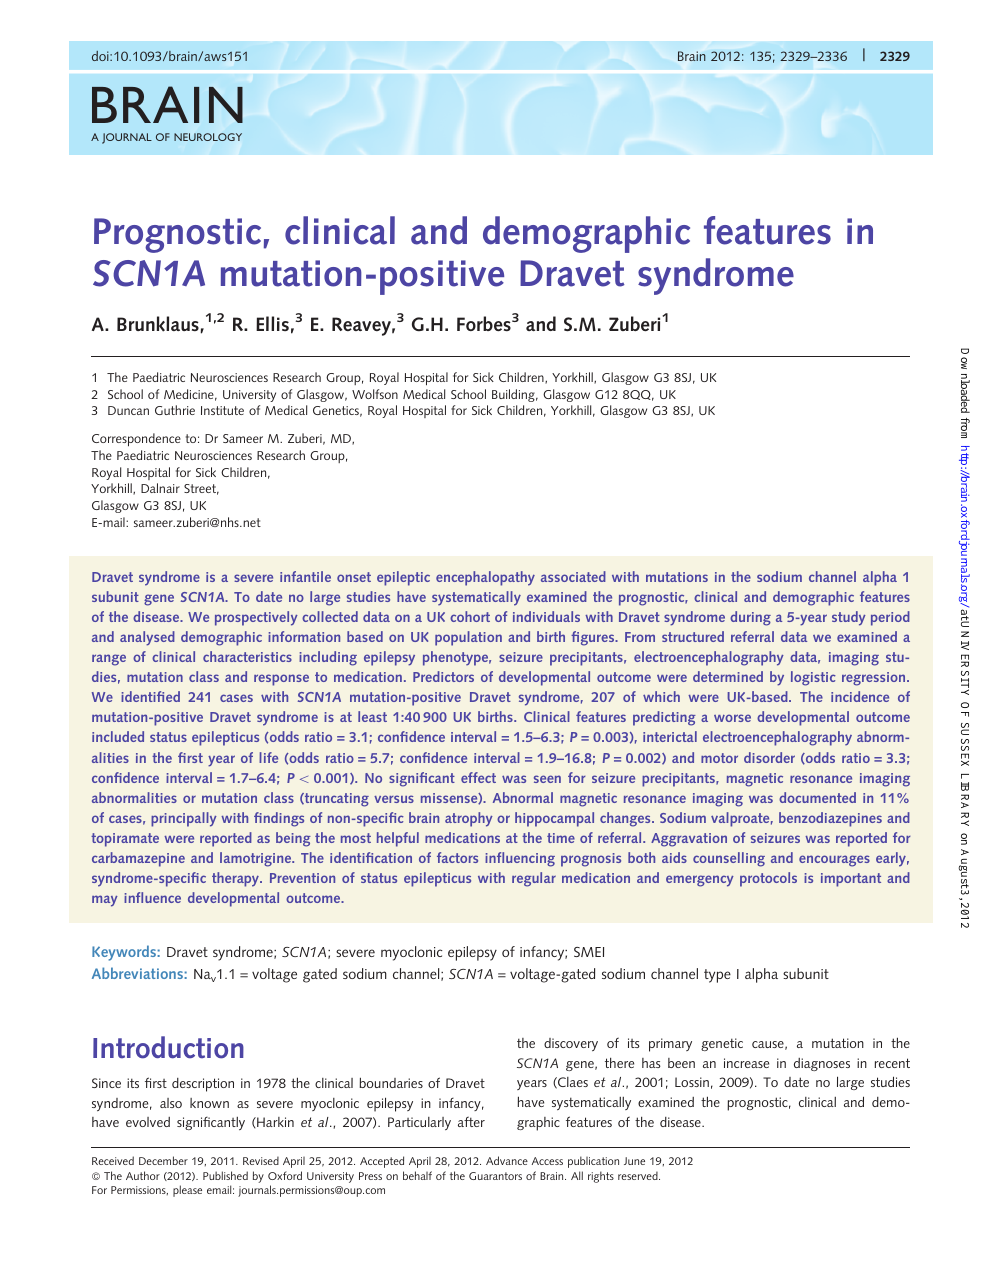 Prognostic Clinical And Demographic Features In Scn1a Mutation Positive Dravet Syndrome Topic Of Research Paper In Clinical Medicine Download Scholarly Article Pdf And Read For Free On Cyberleninka Open Science Hub